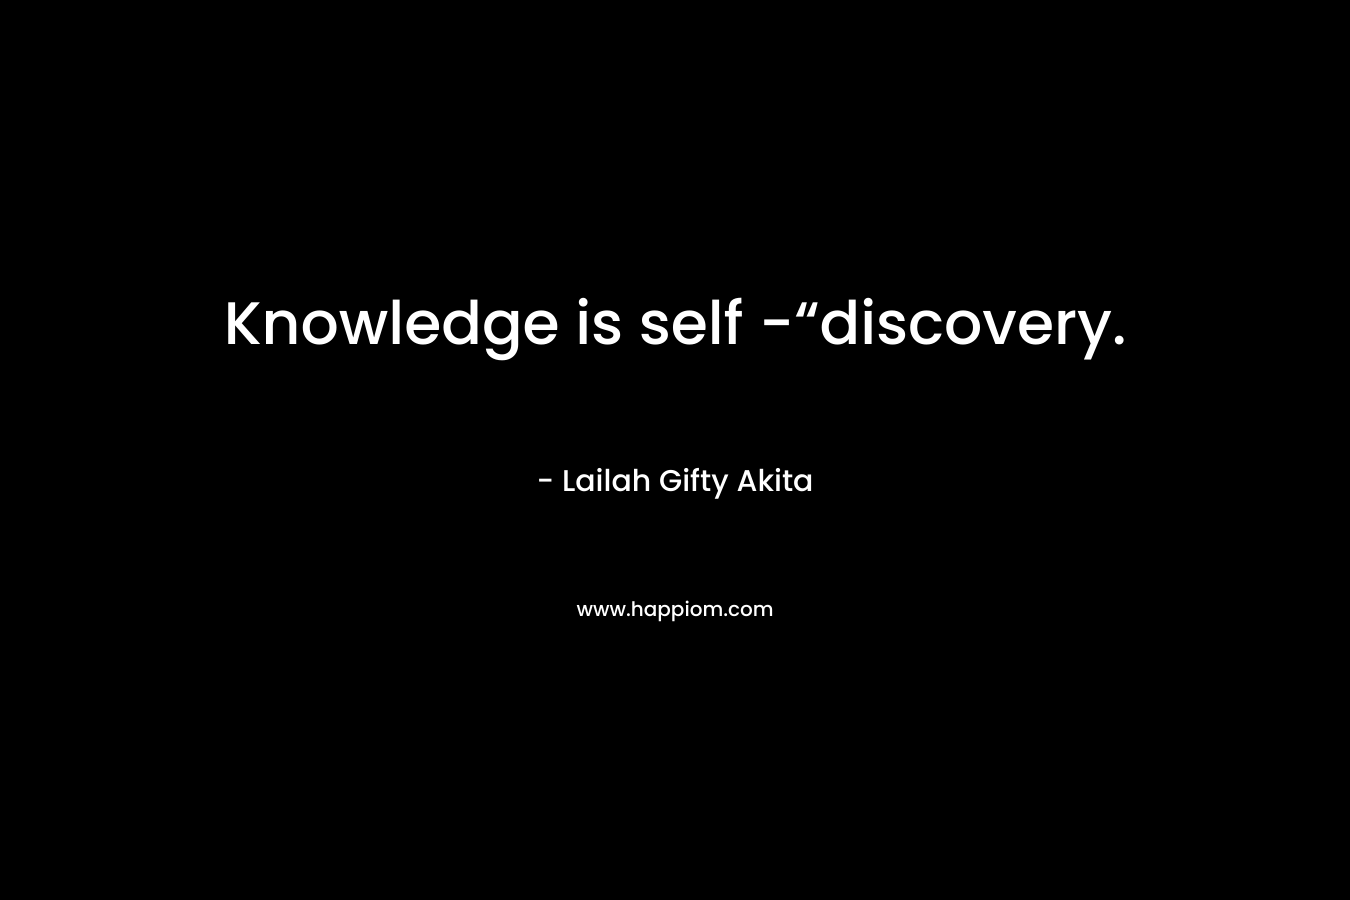 Knowledge is self -“discovery.